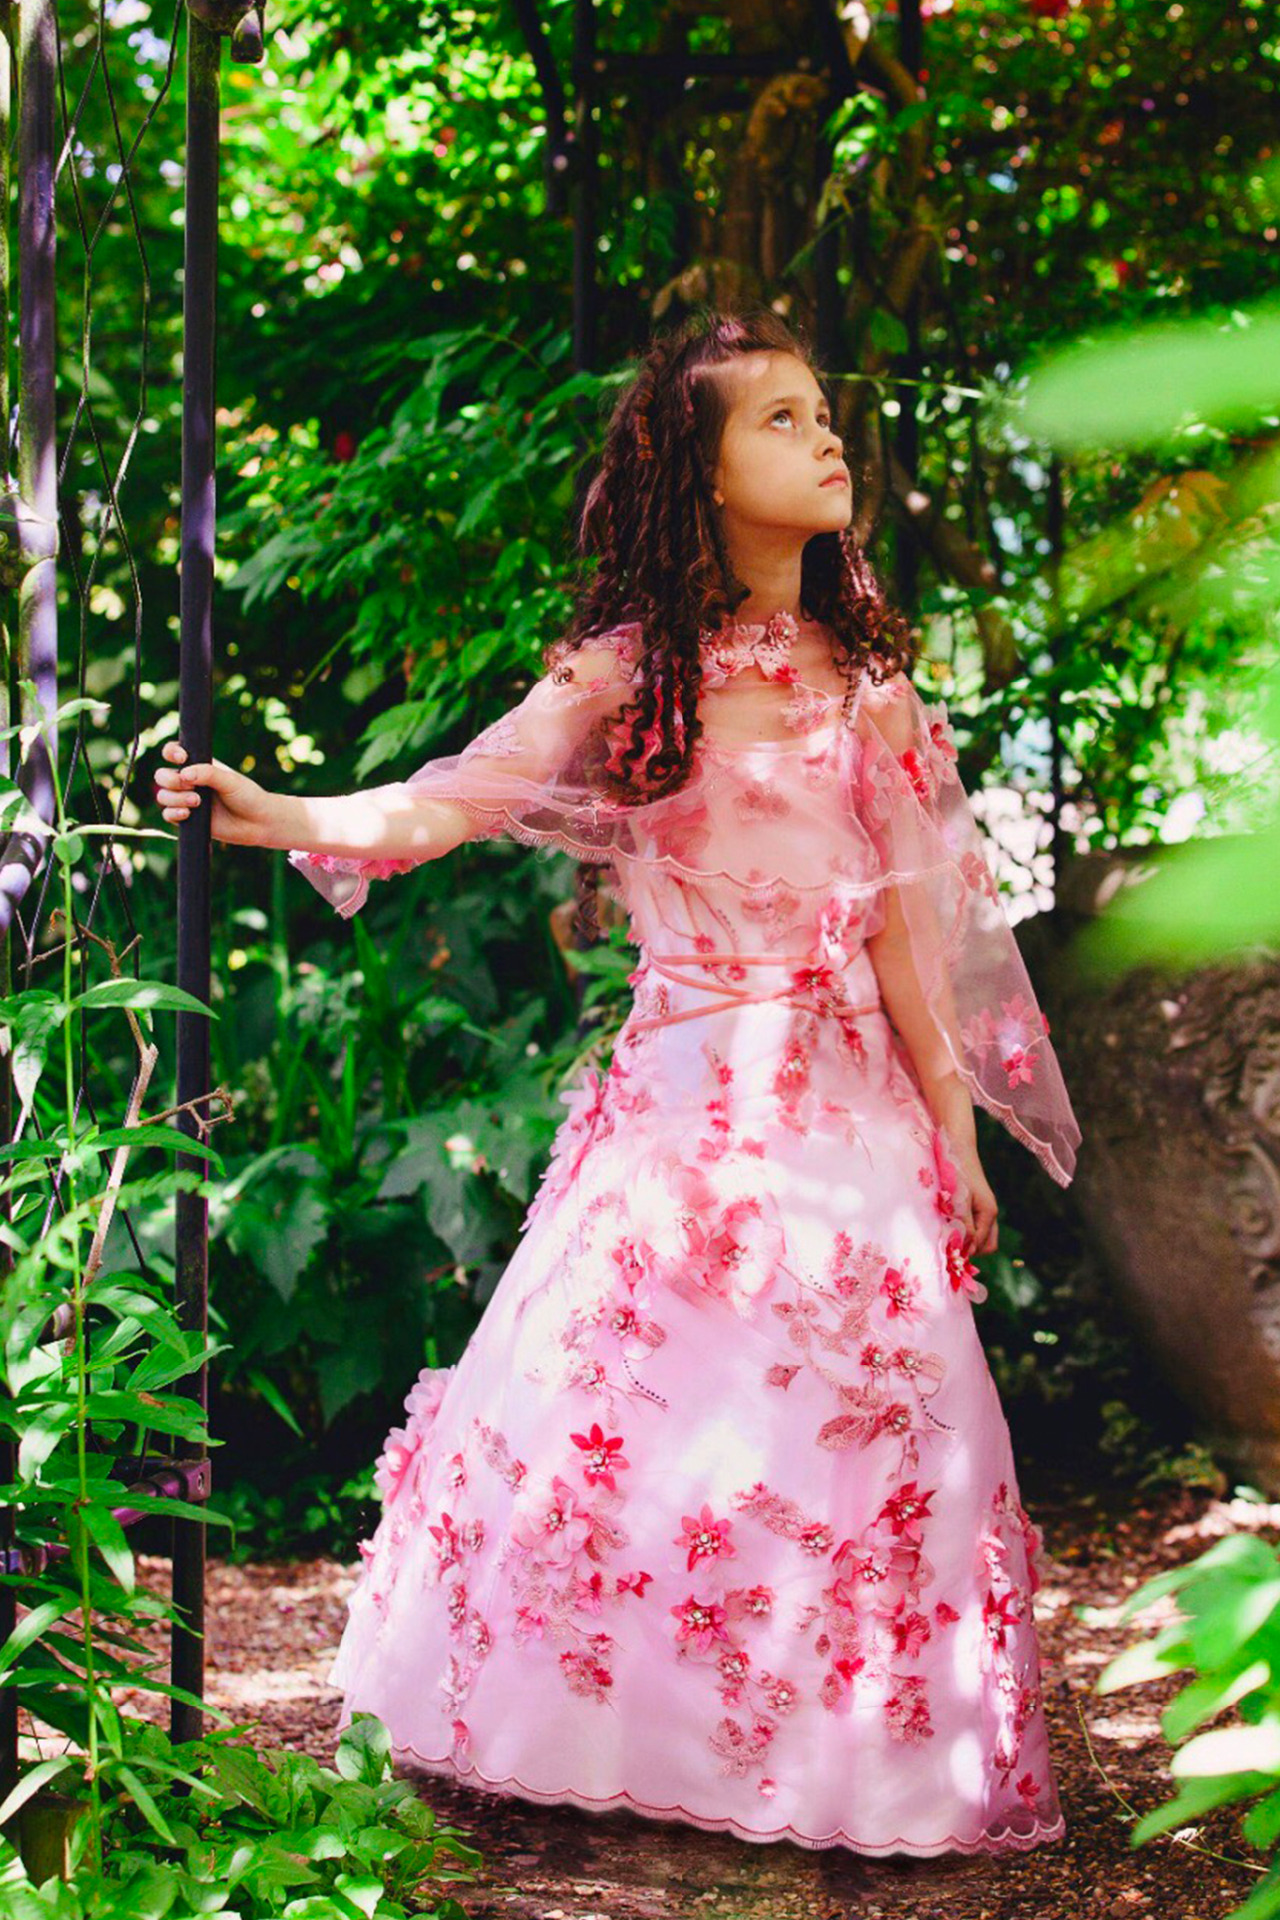 Cherry Blossom Couture Dress by Miashan - Beautiful hand crafted high fashion for girls